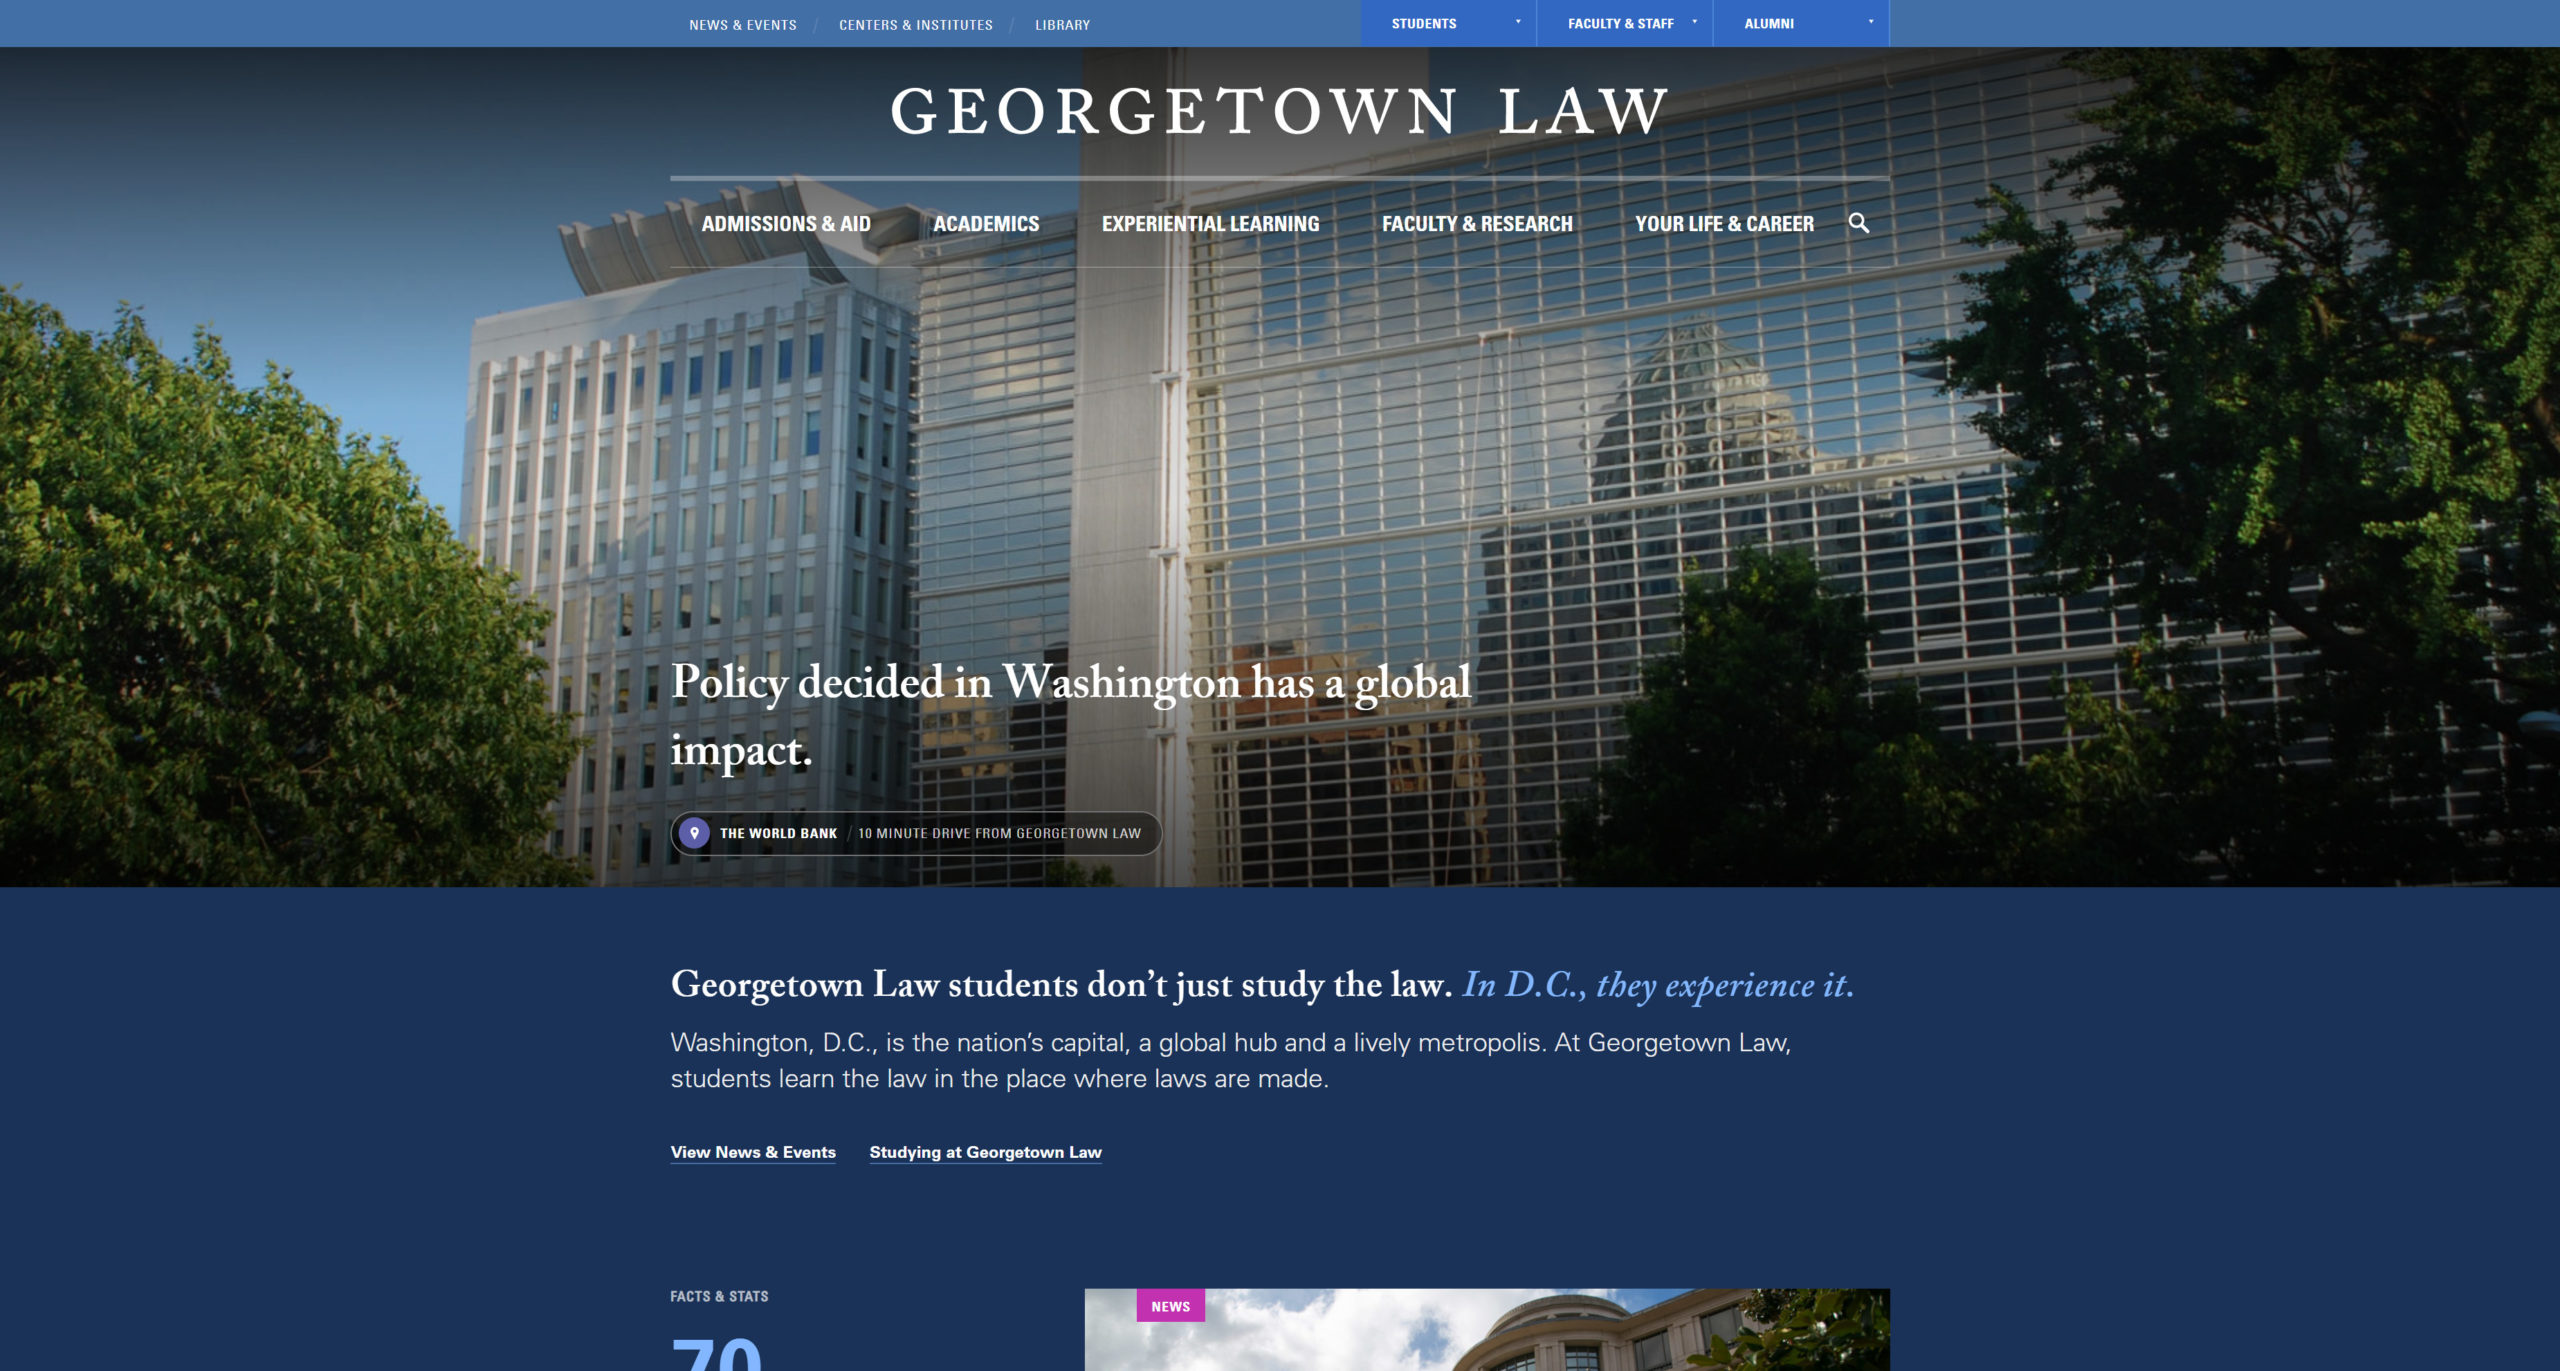 Go to Georgetown Law website to see the design.